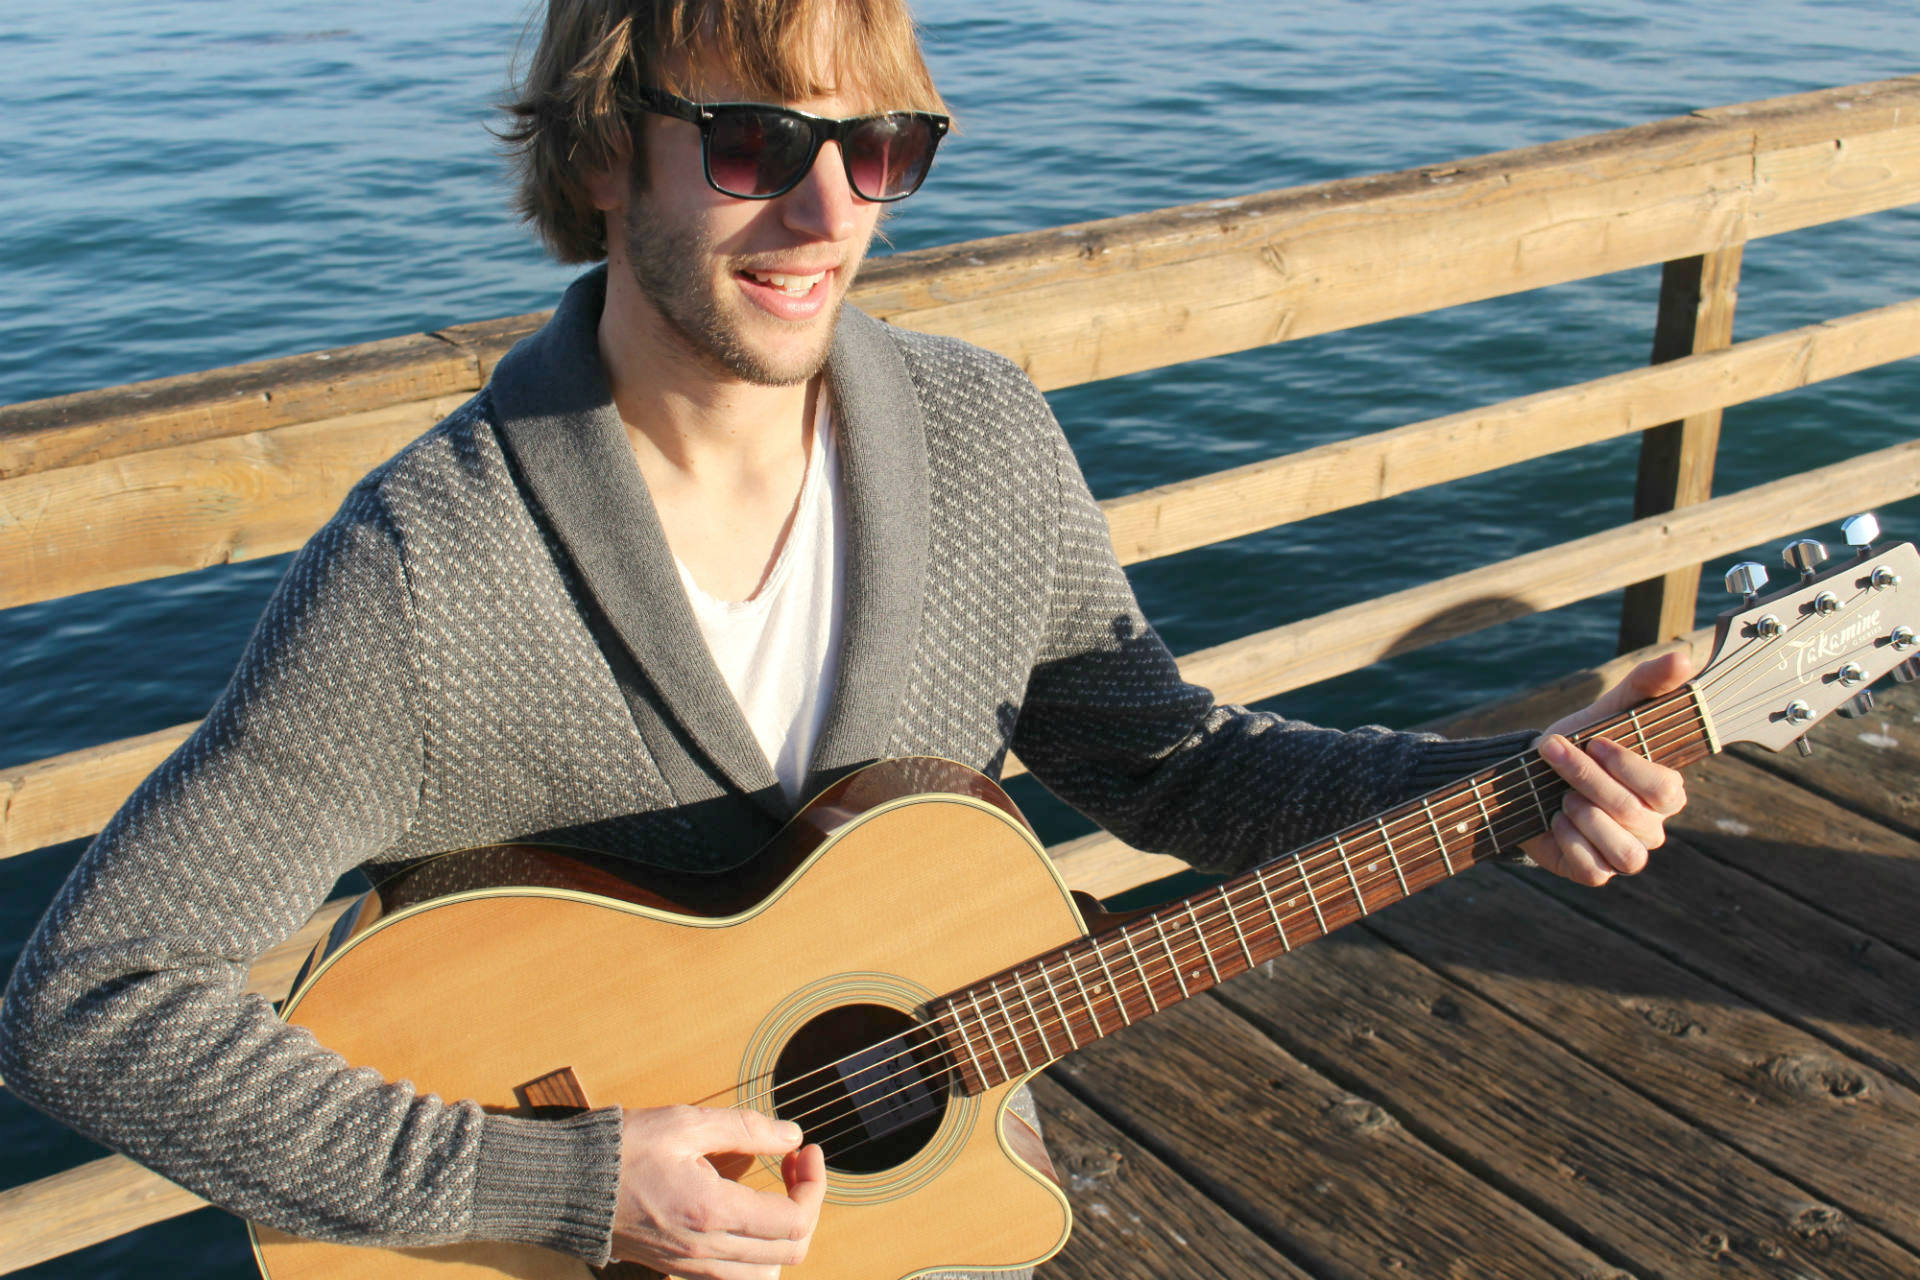 <b>The songwriter himself.</b>
Justin Hooper fingerpicks a song from the new album 'A Love Story' on the guitar in Avila Beach, California. 'I have been writing songs since I was 19, which was before I met Kayla. Over the years, they turned out to evolve into what love really looks like—not just the romance of it, but how much worth it everything is than I thought it would be. She is the muse.'
